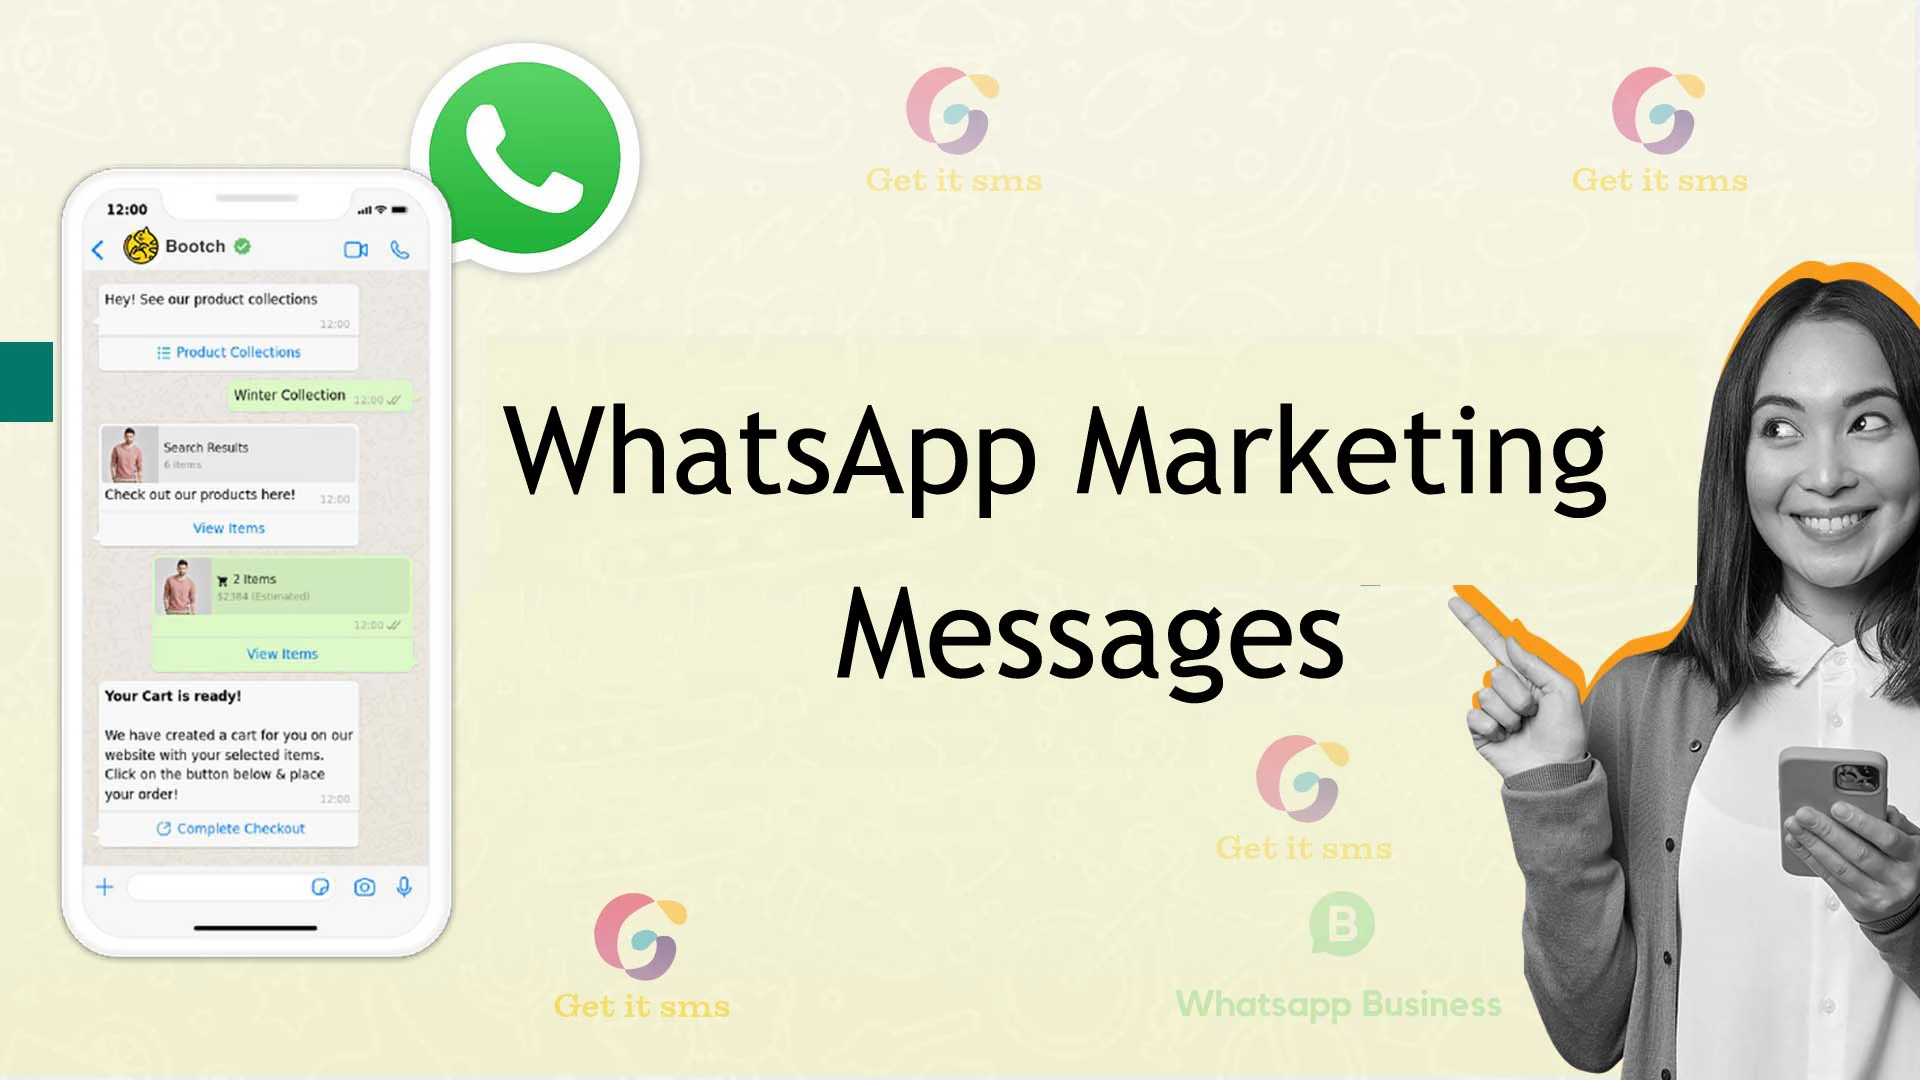 WhatsApp Marketing Messages: How To Send?